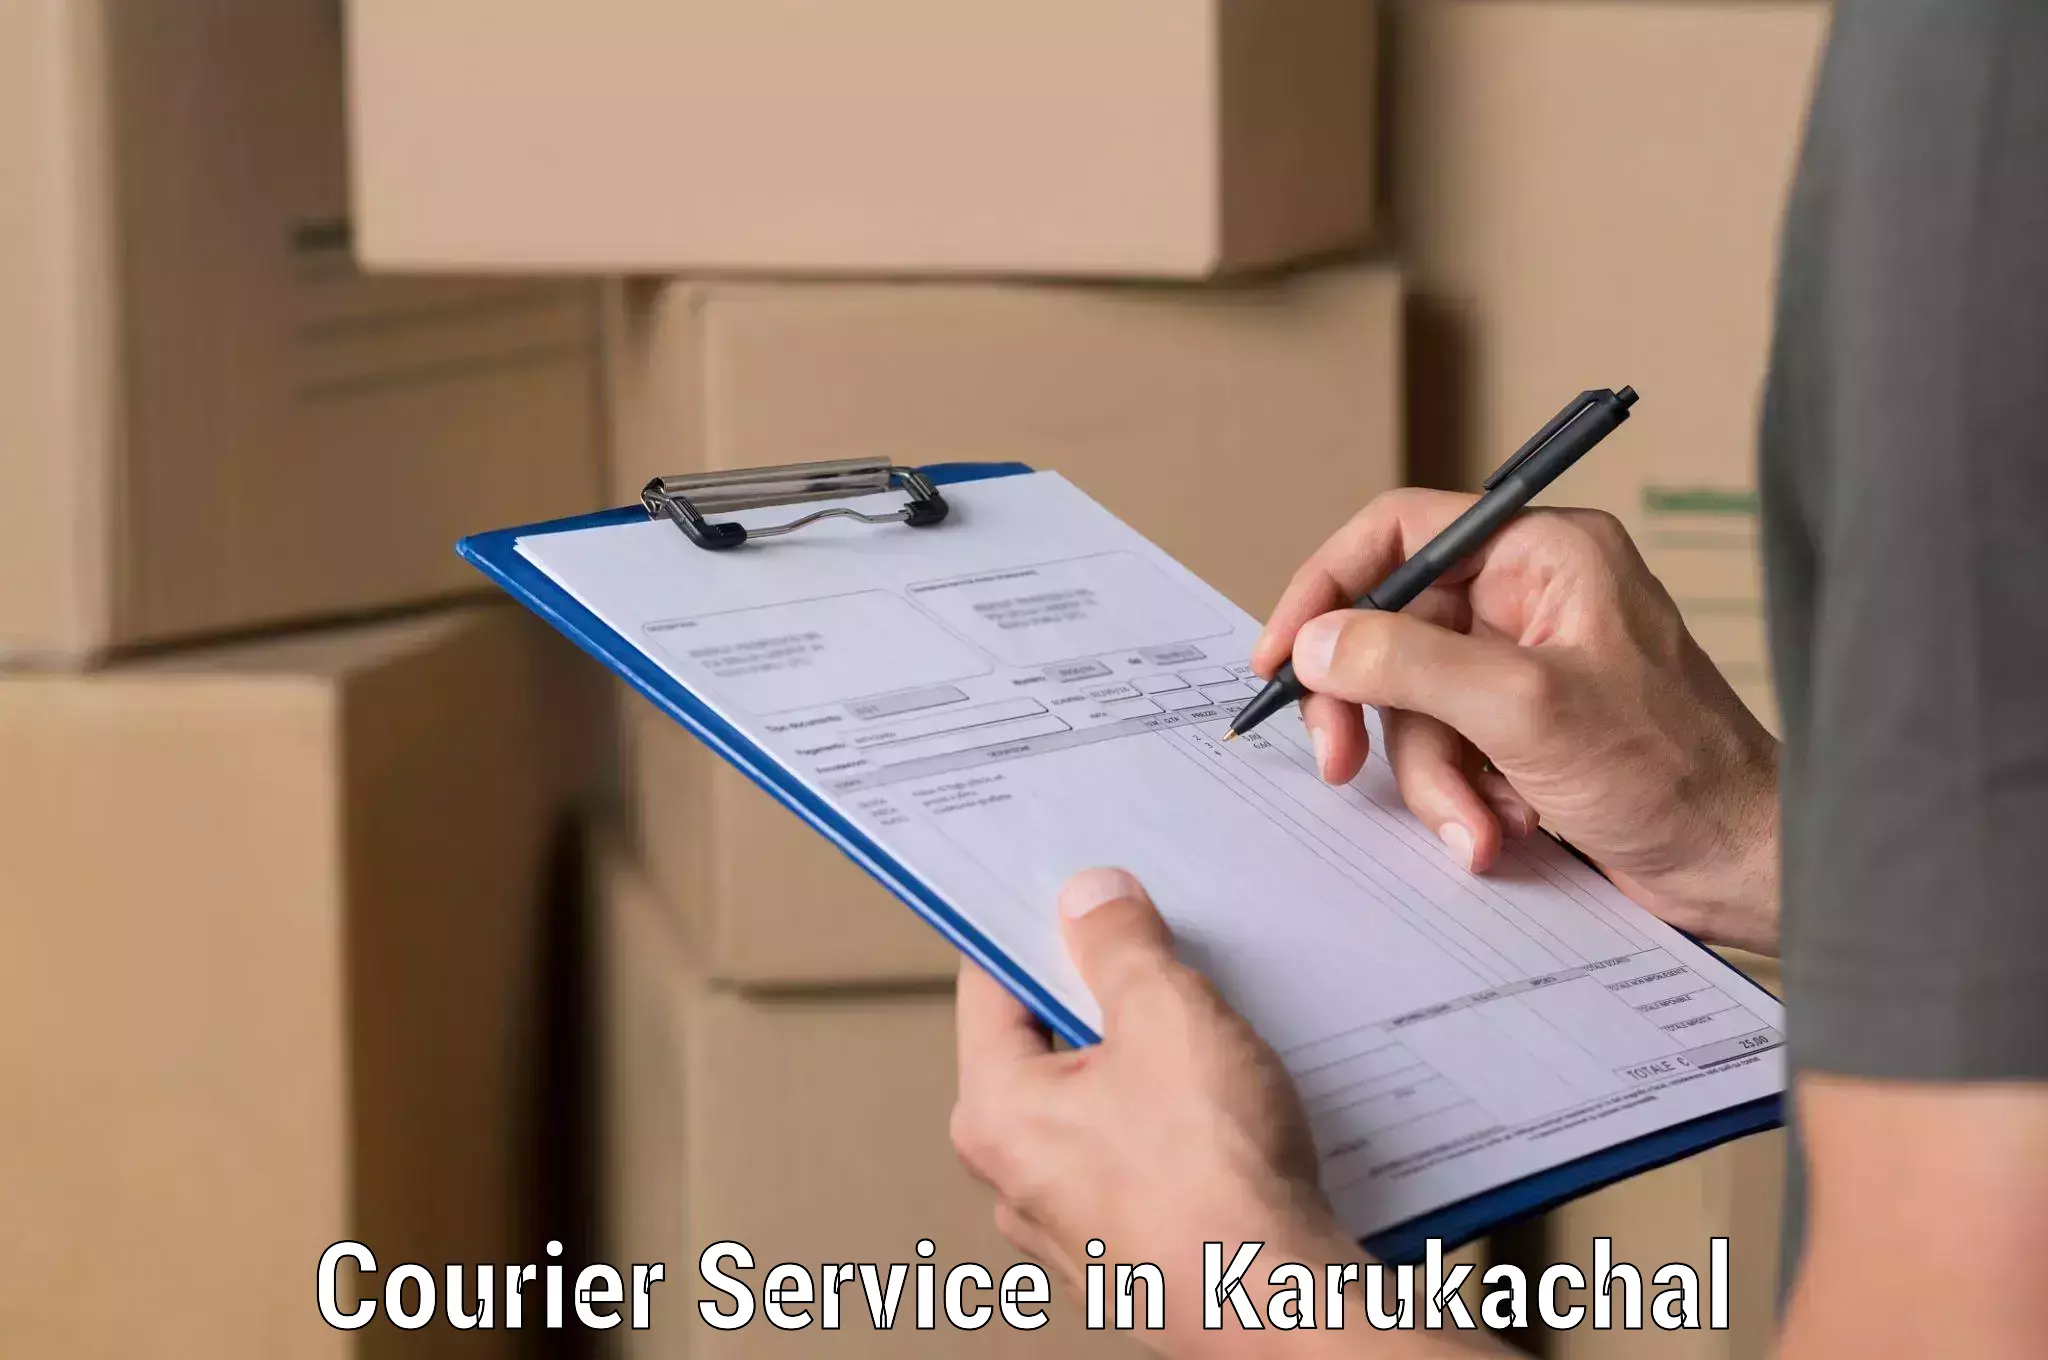 Professional parcel services in Karukachal